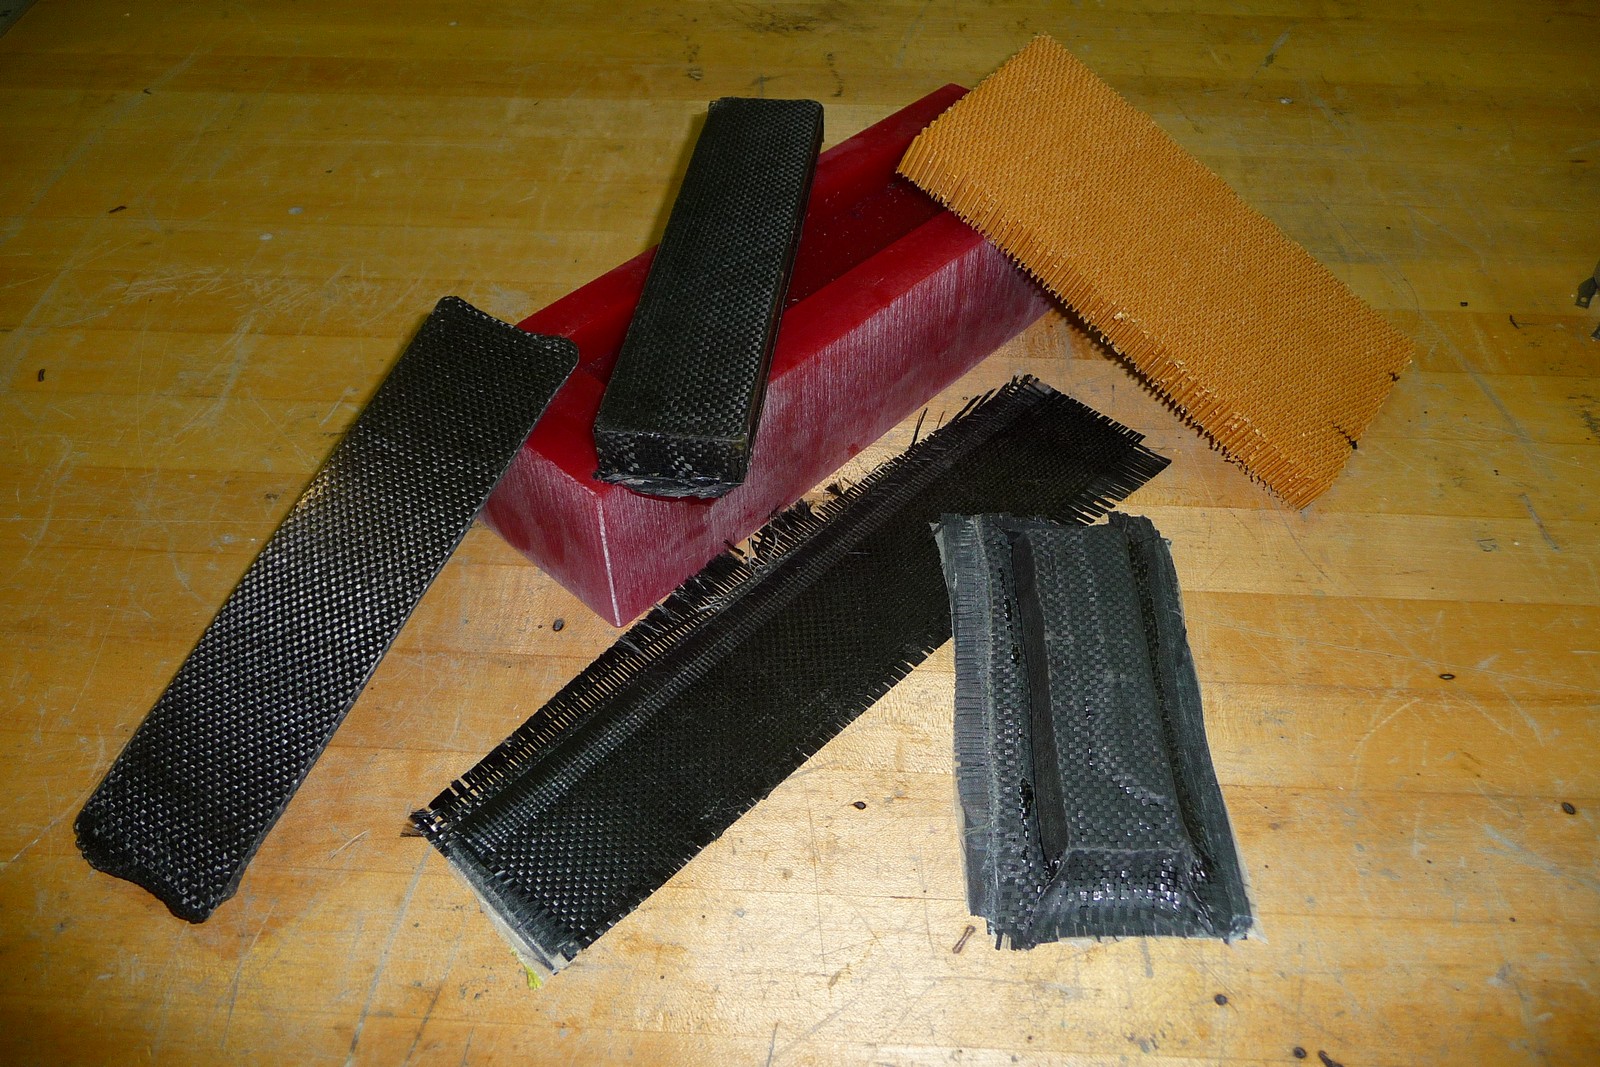 Composite materials mold and samples